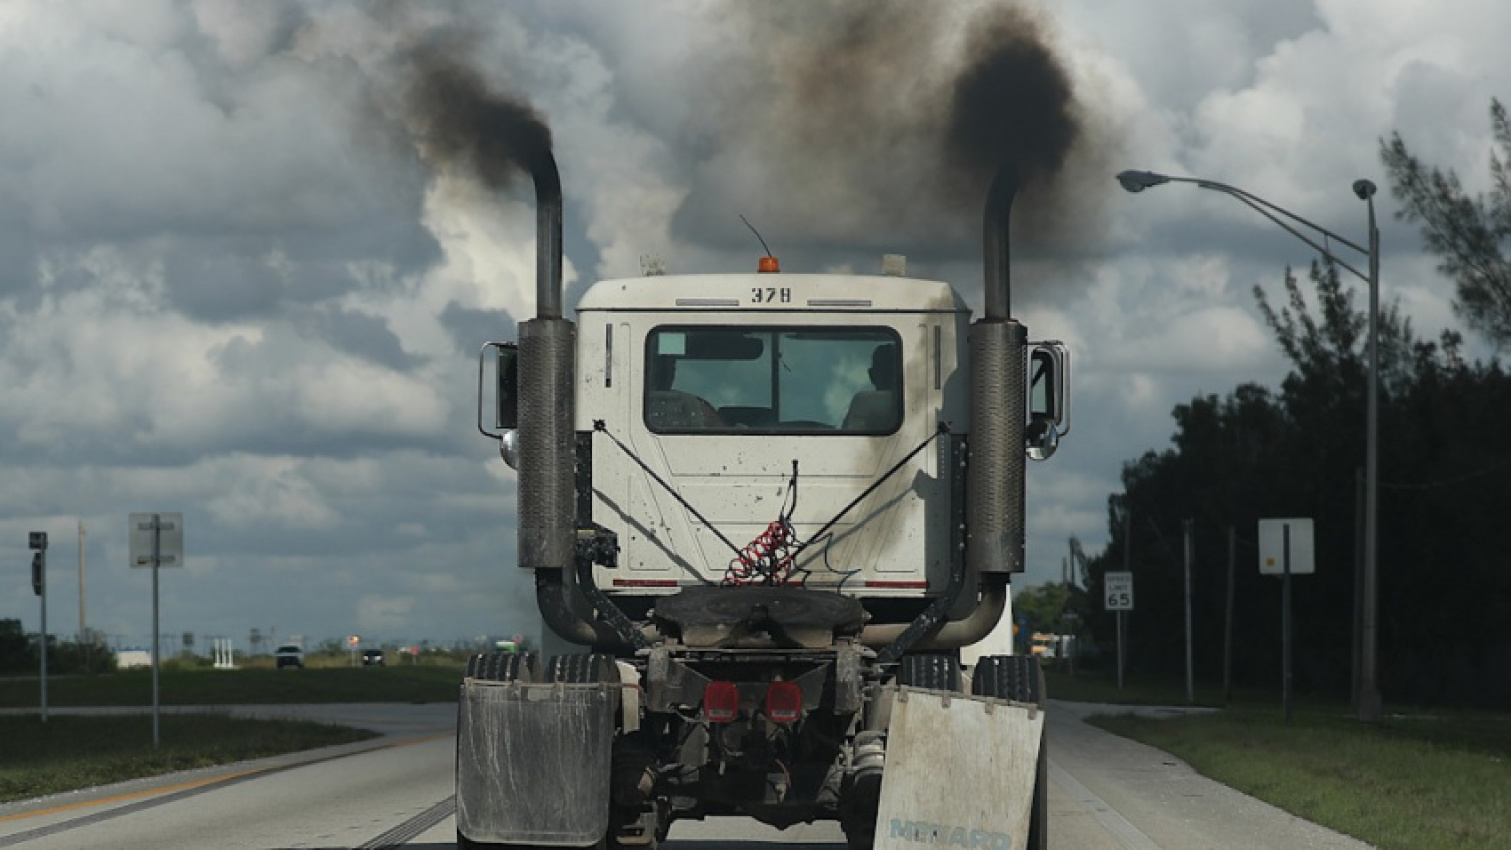 autos, cars, commercial vehicles, government/legal, green, epa proposes cuts to smog, soot pollution from heavy trucks